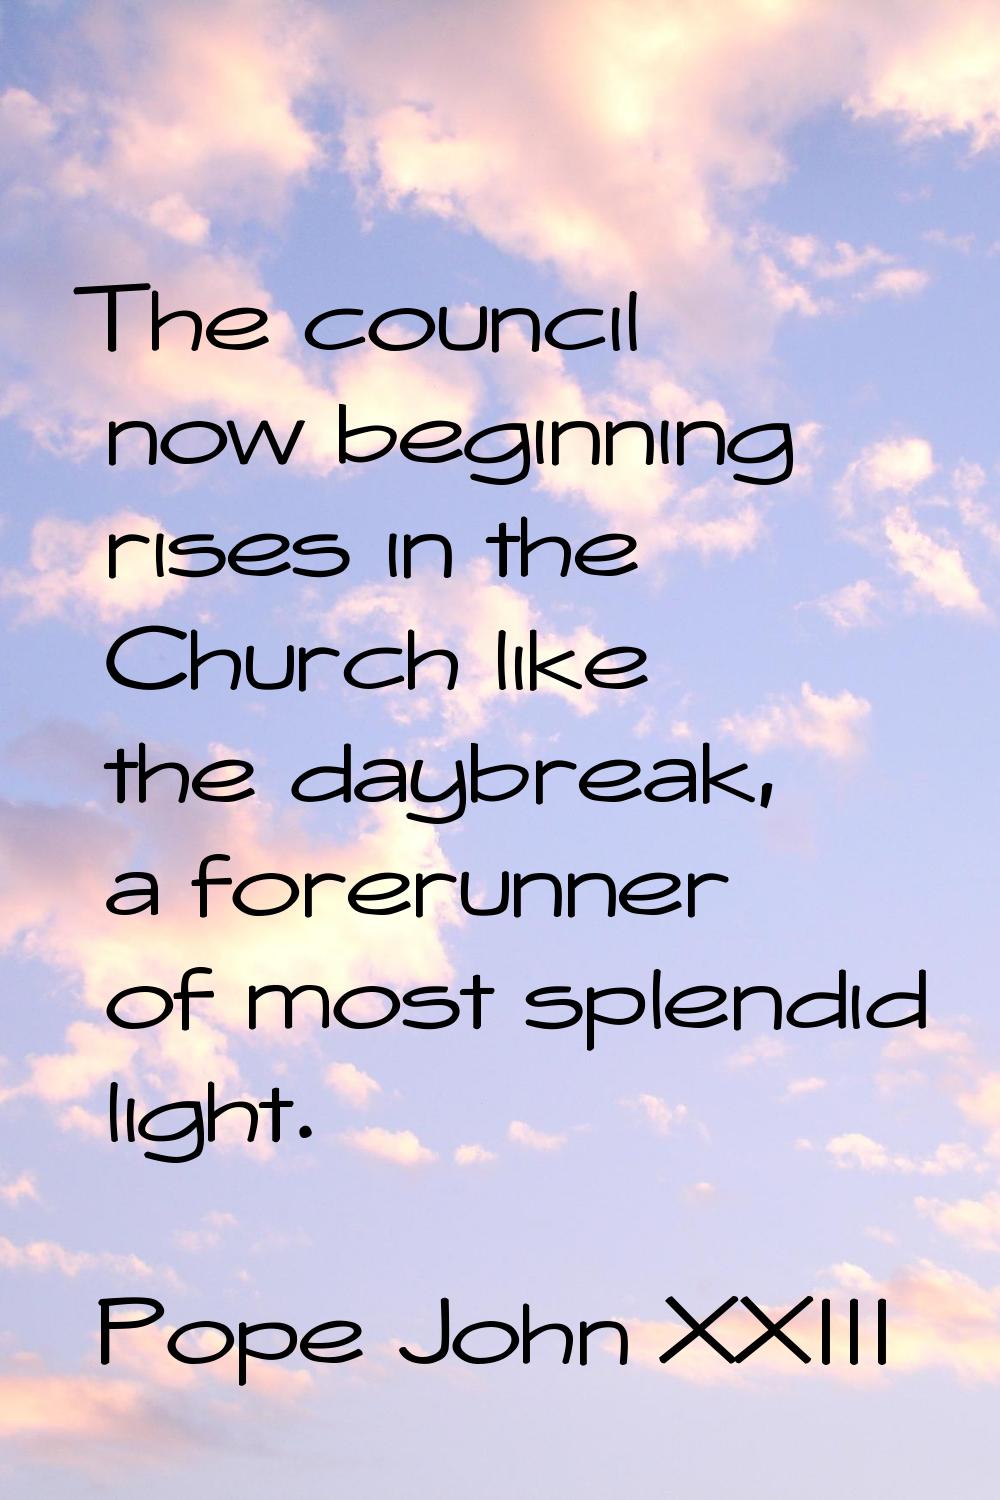 The council now beginning rises in the Church like the daybreak, a forerunner of most splendid ligh